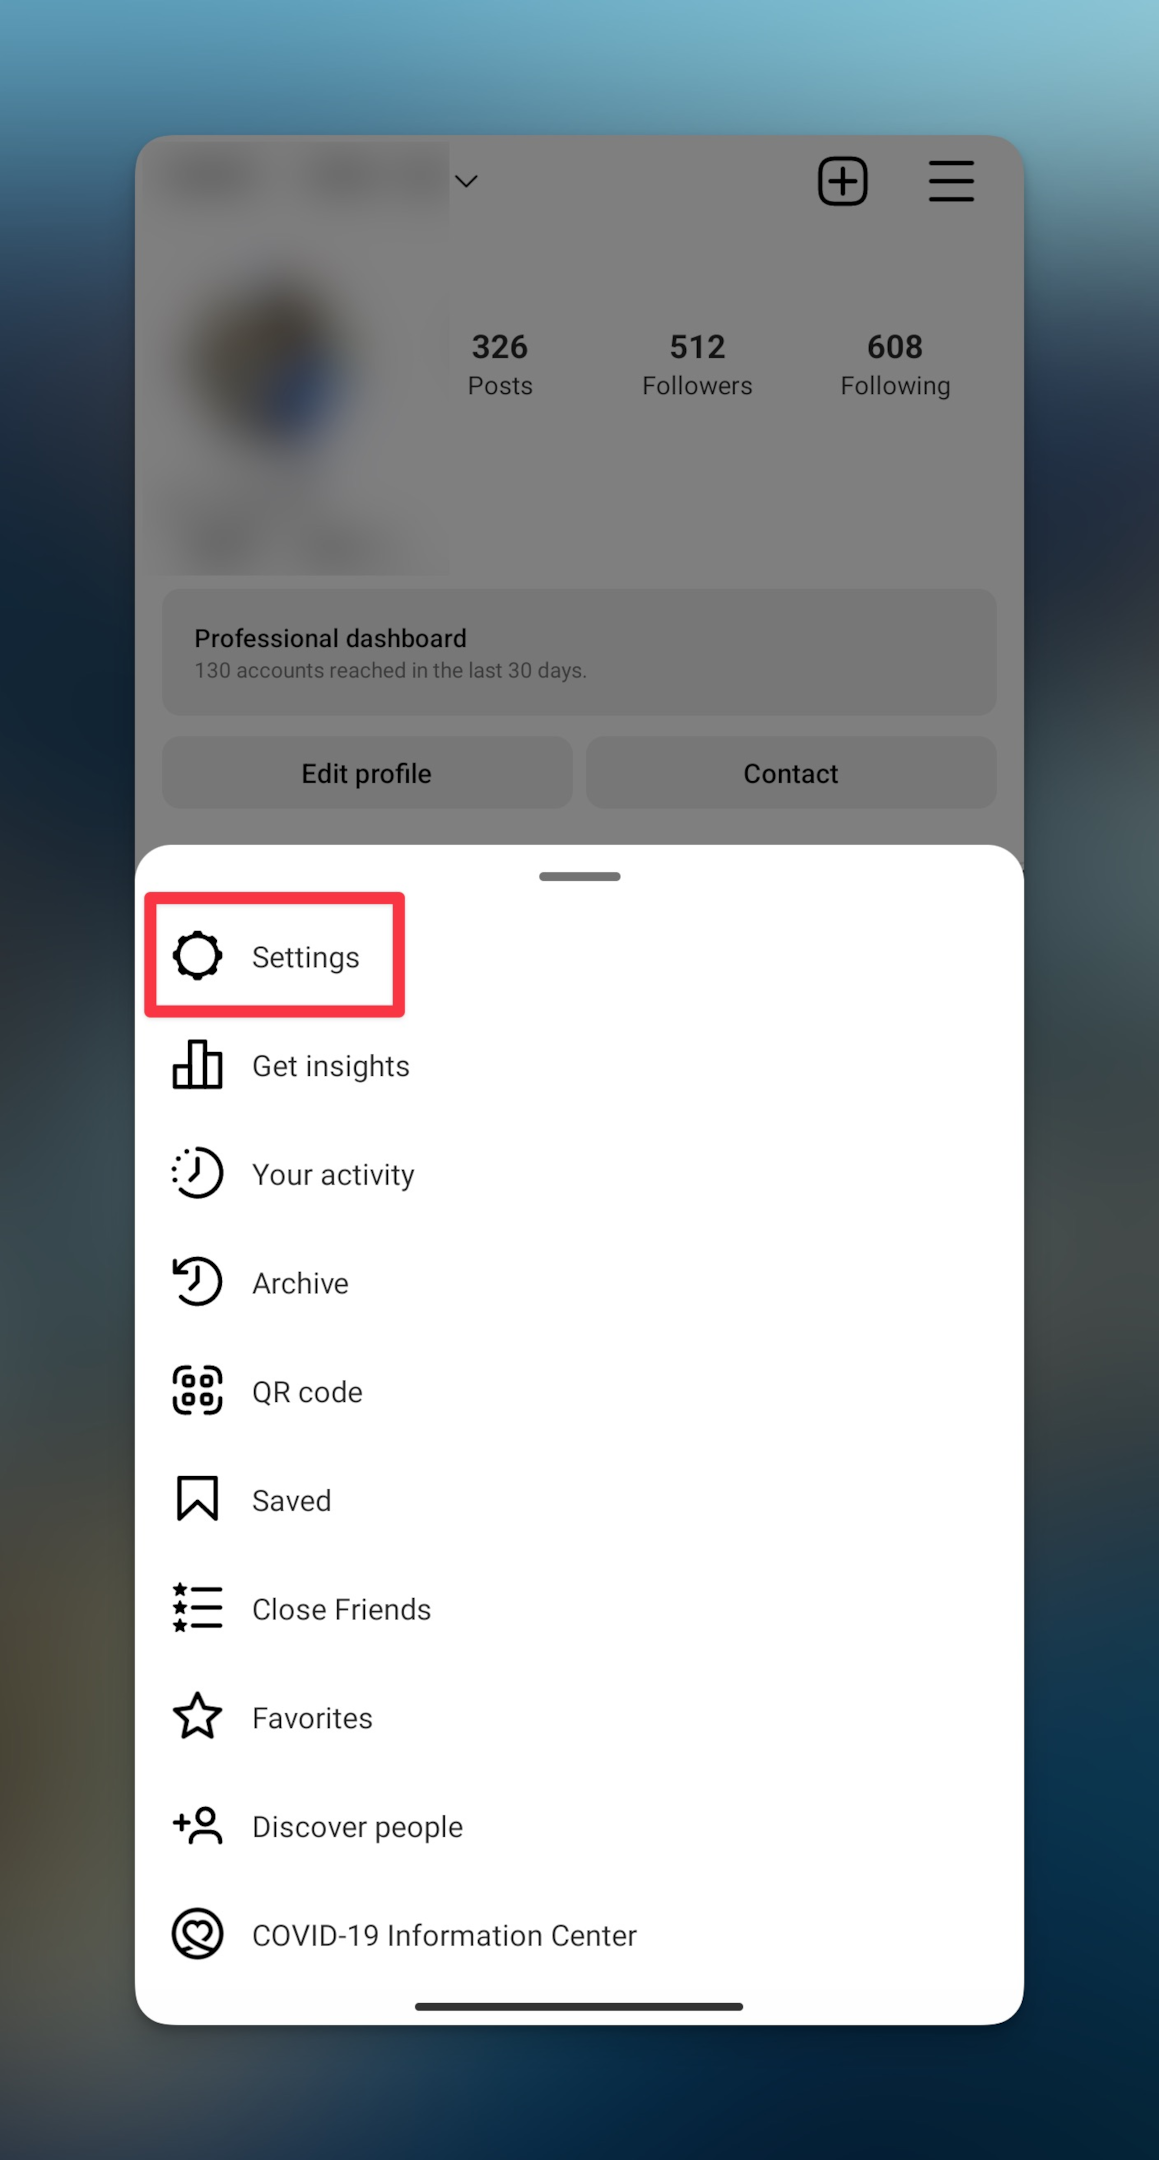 Remote.tools shows to tap on Settings under Instagram profile to block spam comments on any Instagram account